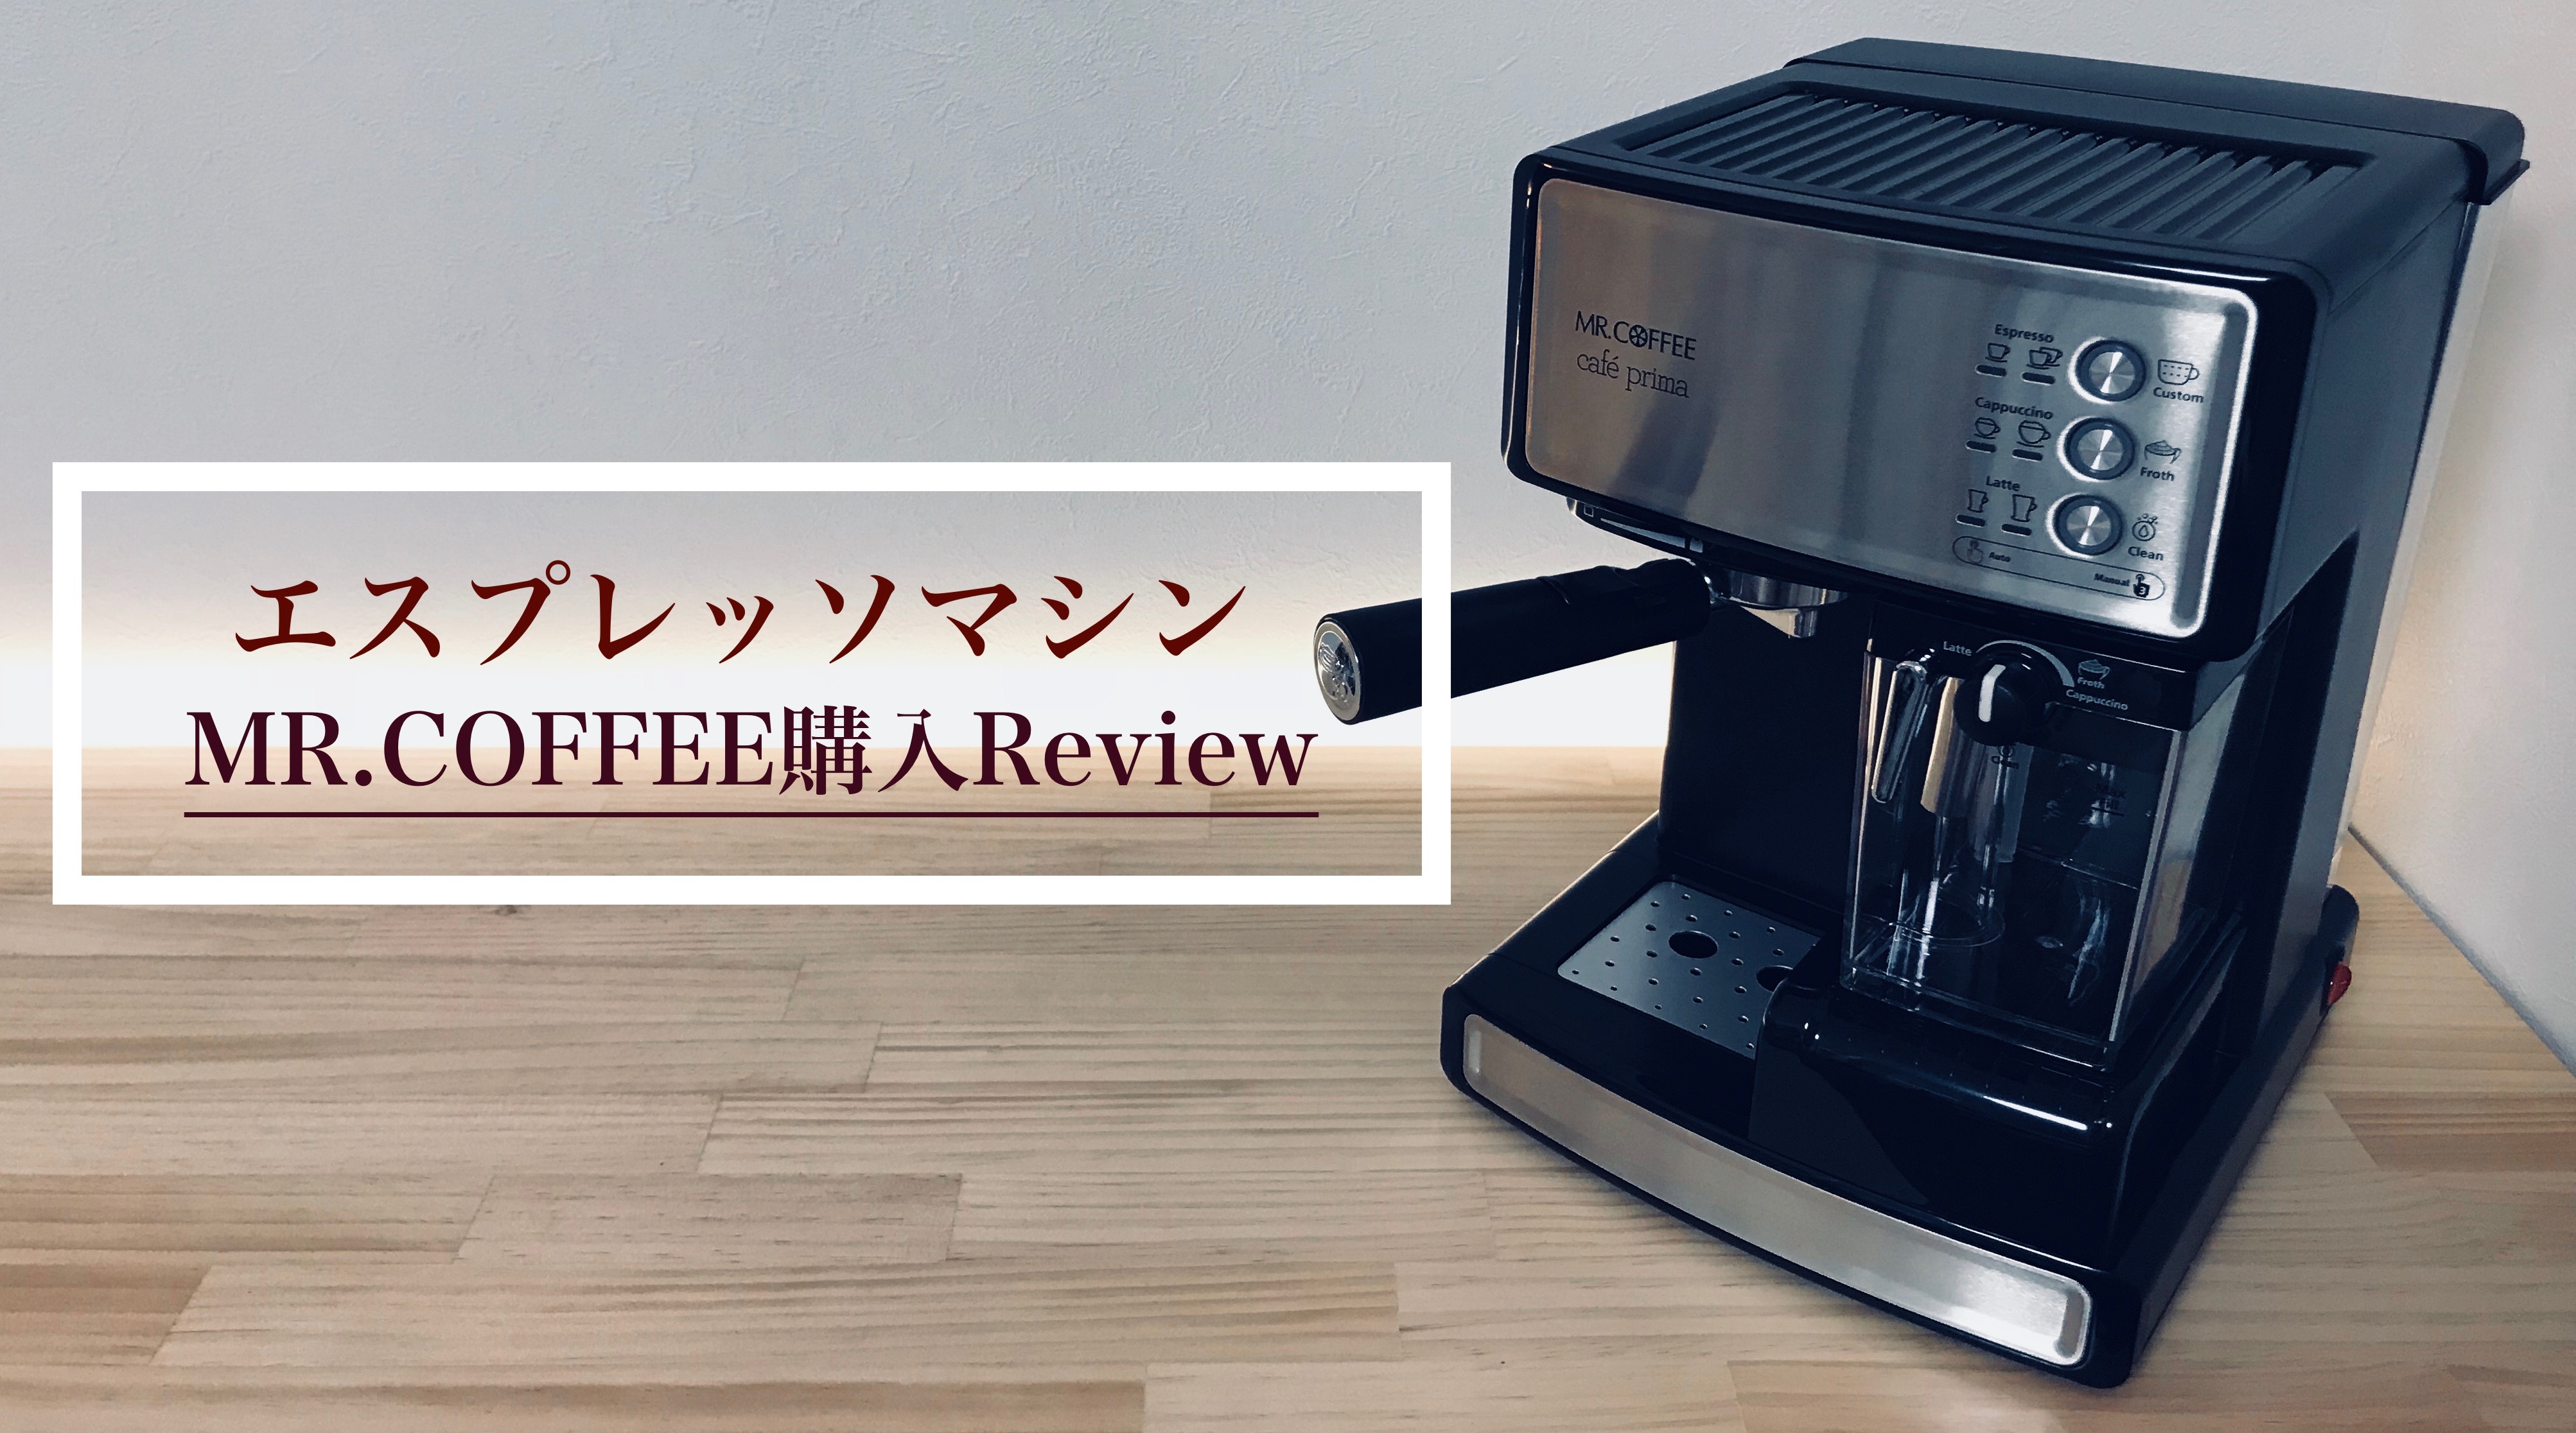 MR.COFFEE cafe' prima購入Review - MouseChord.com